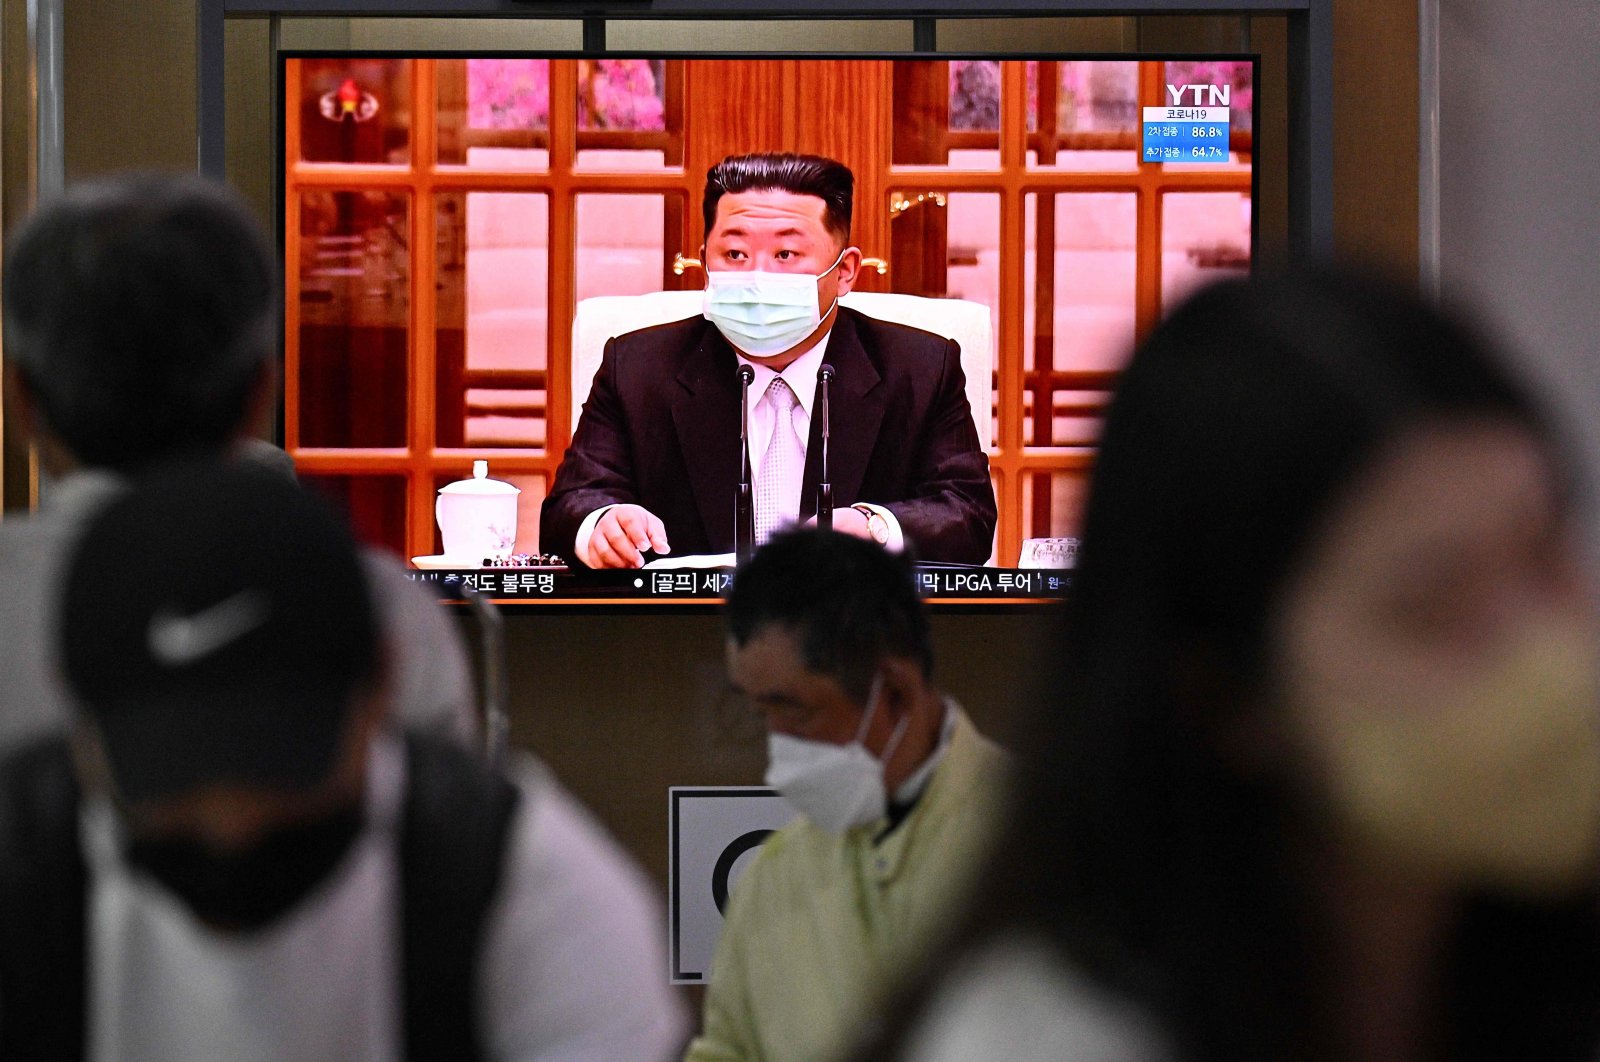 People sit near a screen showing a news broadcast of North Korea leader Kim Jong Un appearing in a face mask on television for the first time to order nationwide lockdowns after the North confirmed its first-ever COVID-19 cases, Seoul, S. Korea, May 12, 2022. (AFP Photo)